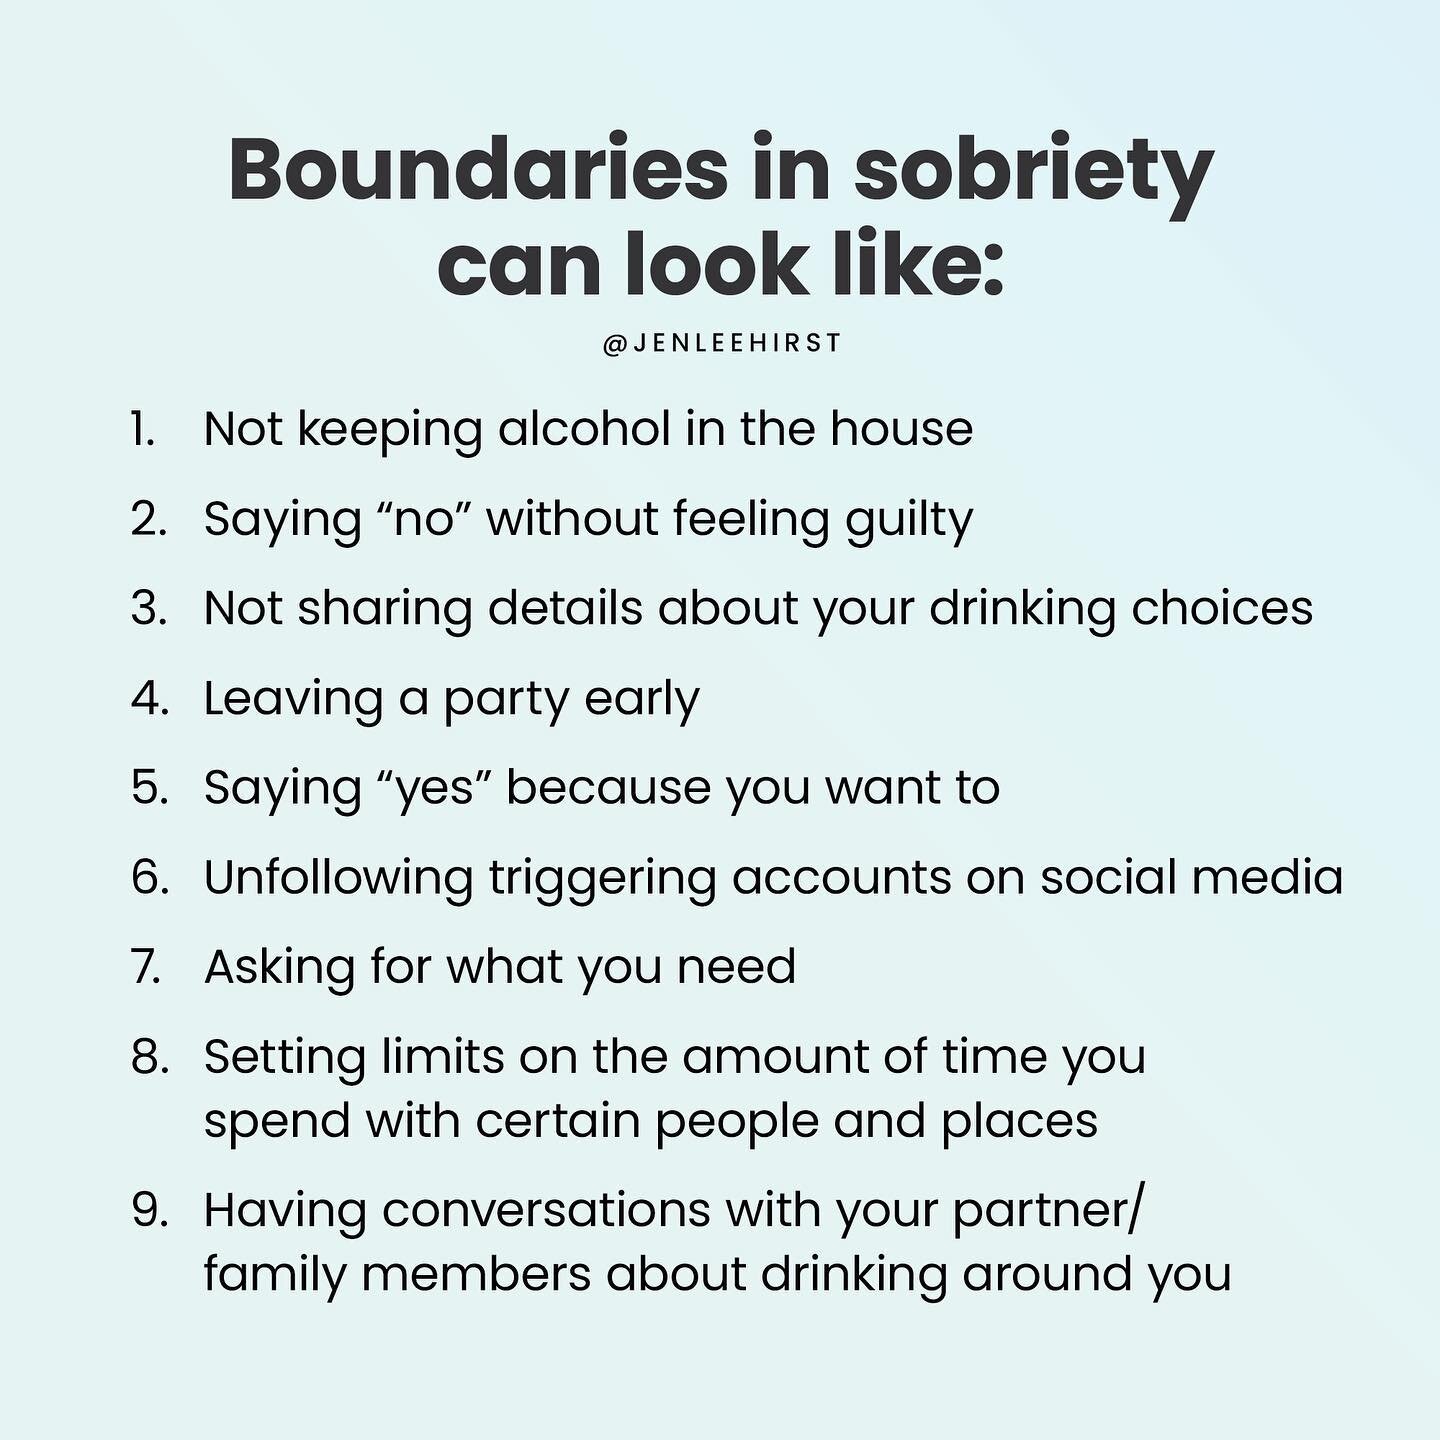 Every personal relationship needs some form of boundaries to be healthy, including friends and family, work, and even with yourself.

If you&rsquo;re newly sober or have been in recovery for some time, chances are you will need to set some boundaries